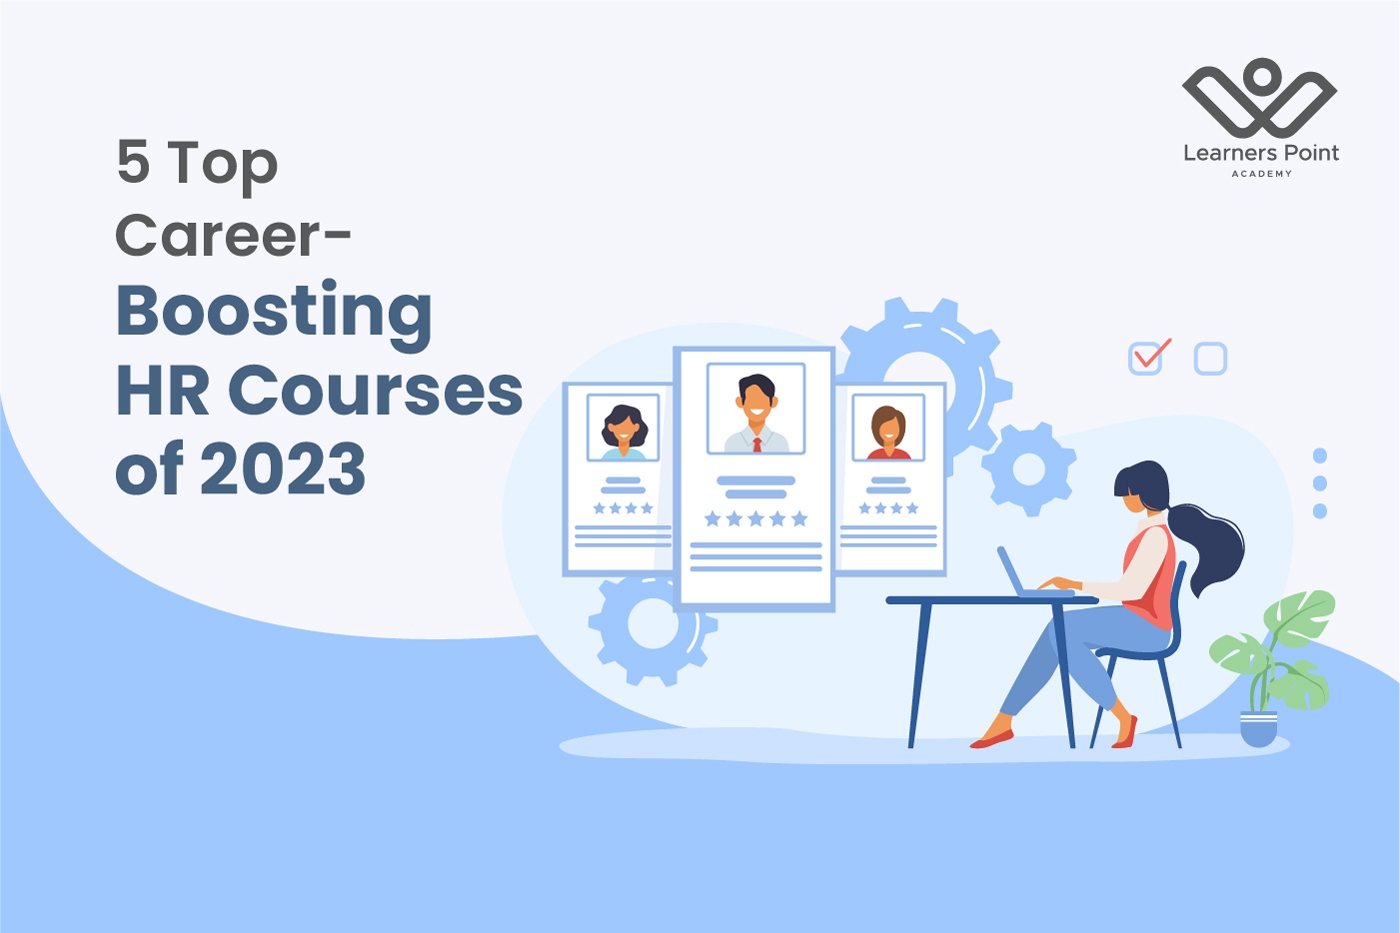 5 Top Career-Boosting HR Courses of 2023